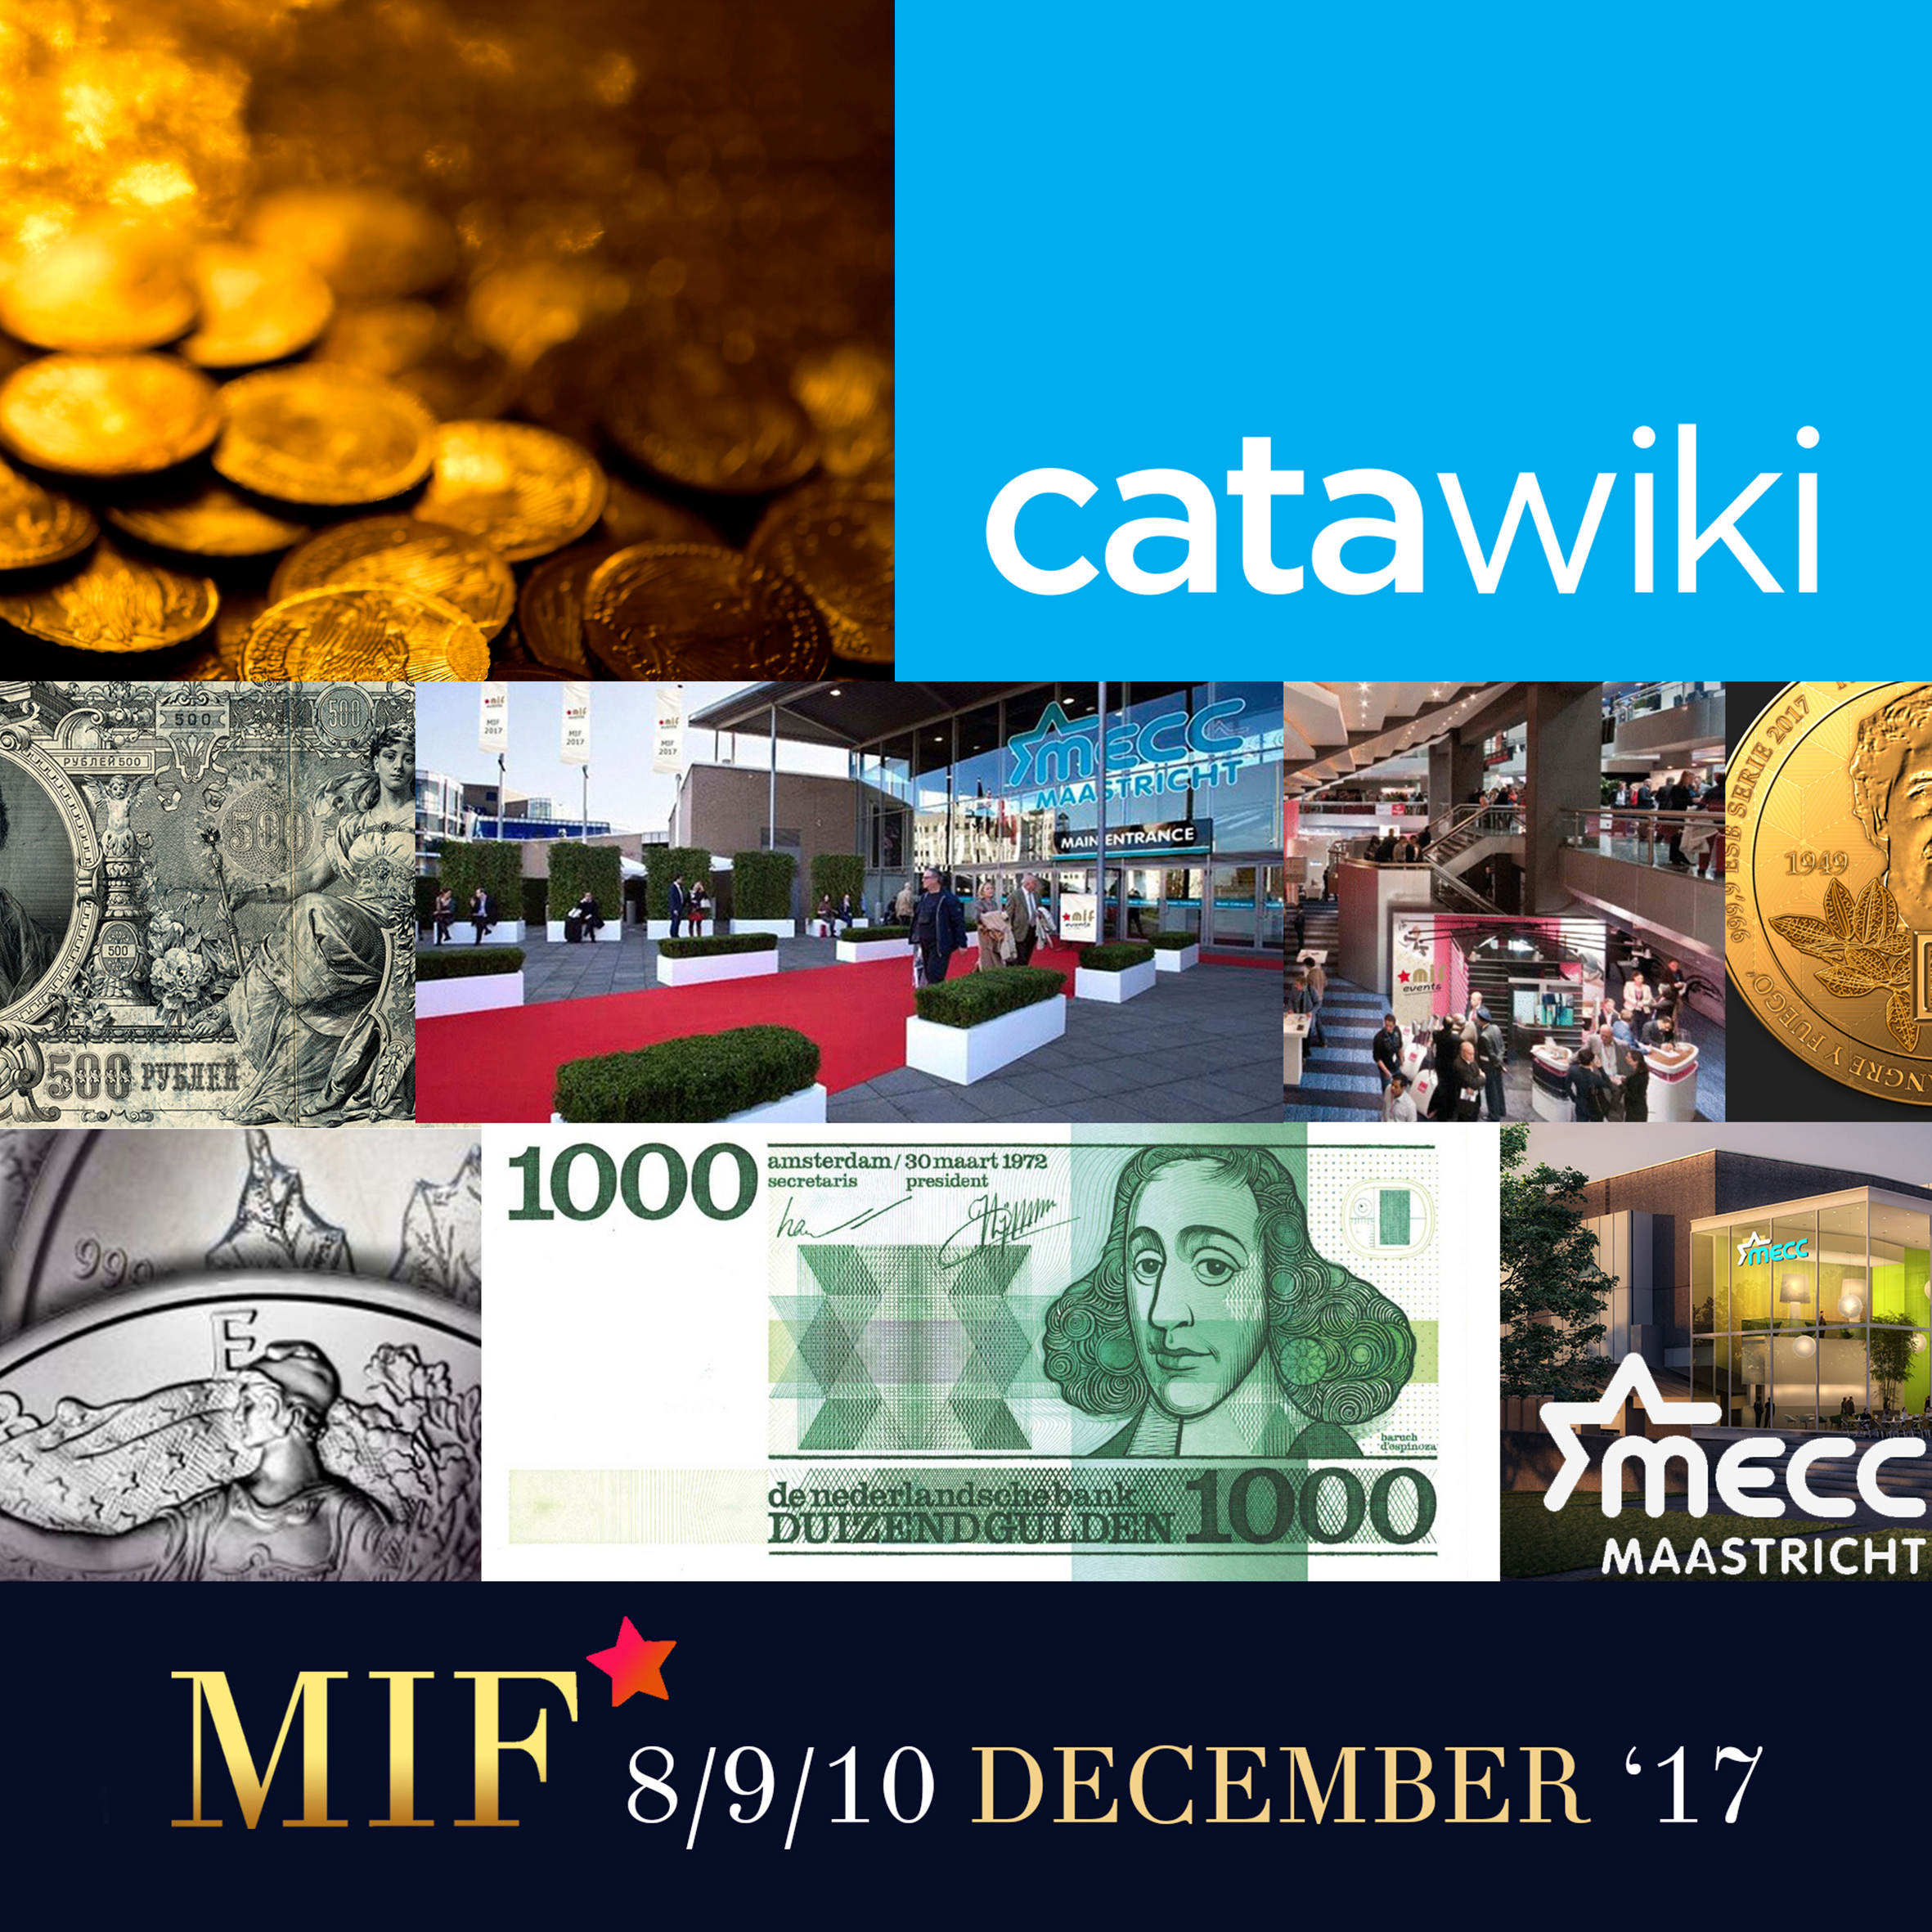 Maastricht International Fair - Europe's fastest growing auction website Catawiki is coming to MIF 2017 in MECC Maastricht